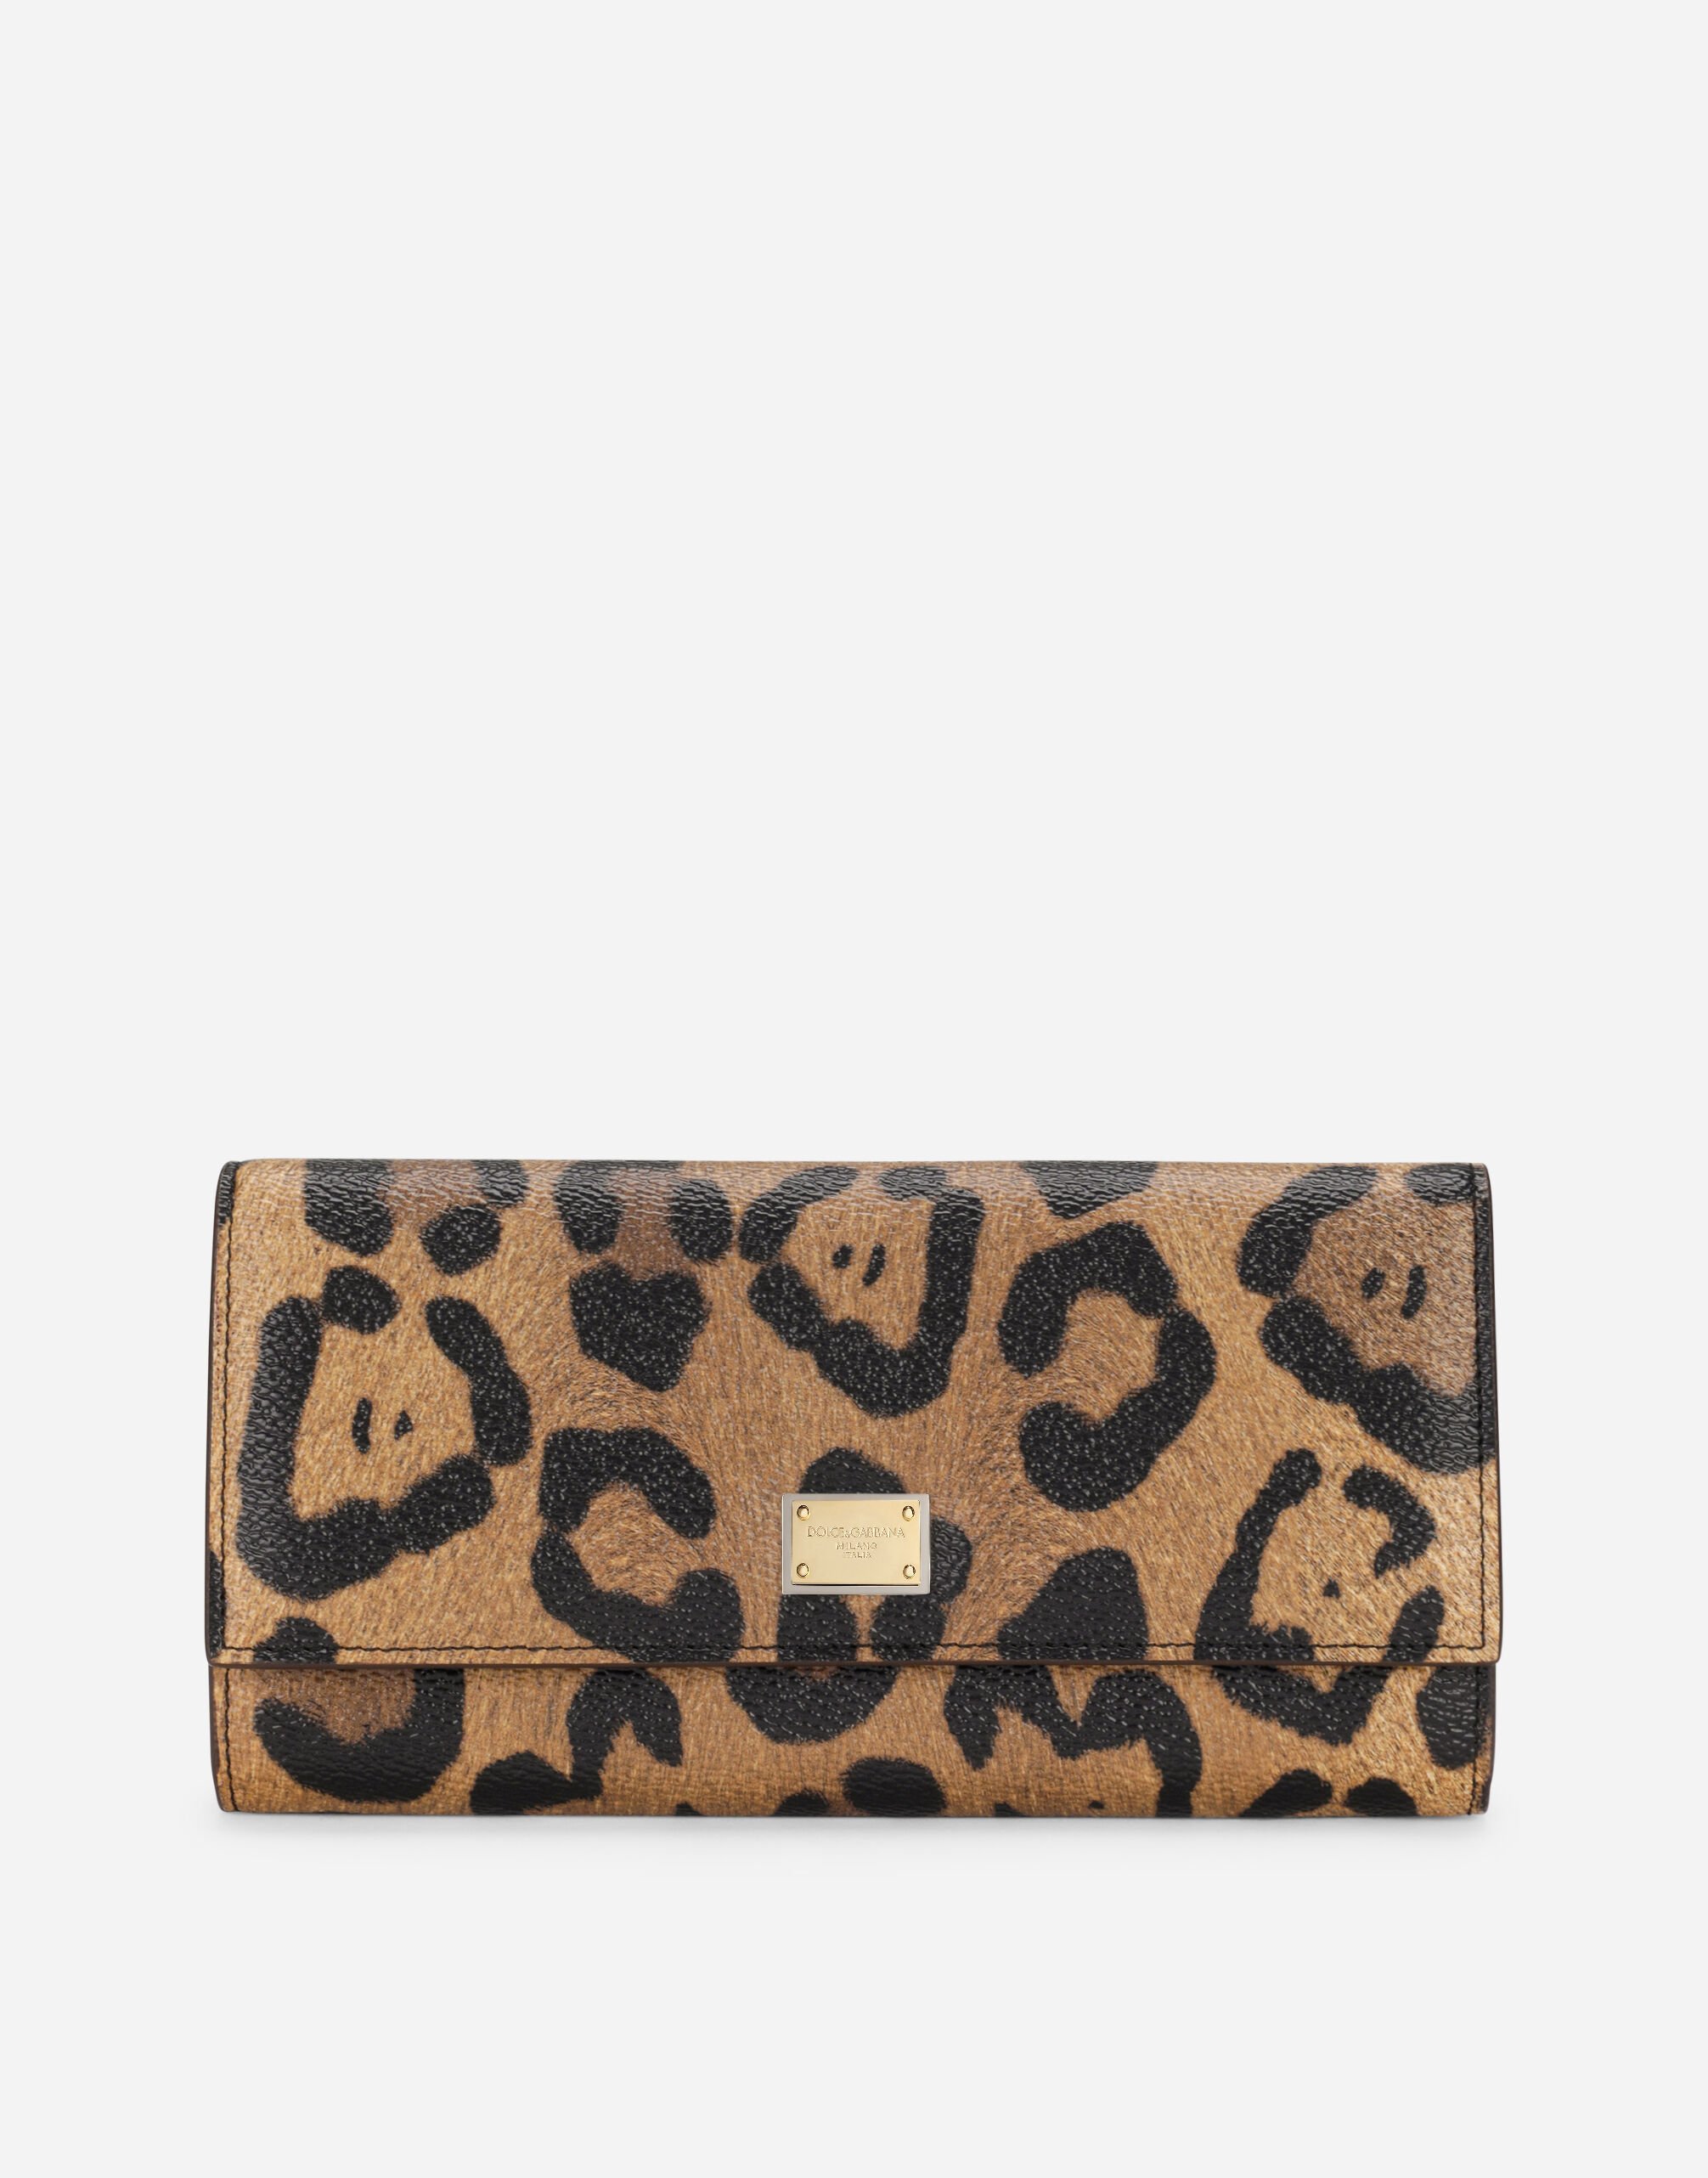 Dolce & Gabbana Leopard-print Crespo continental wallet with branded plate Multicolor BB2207AW384